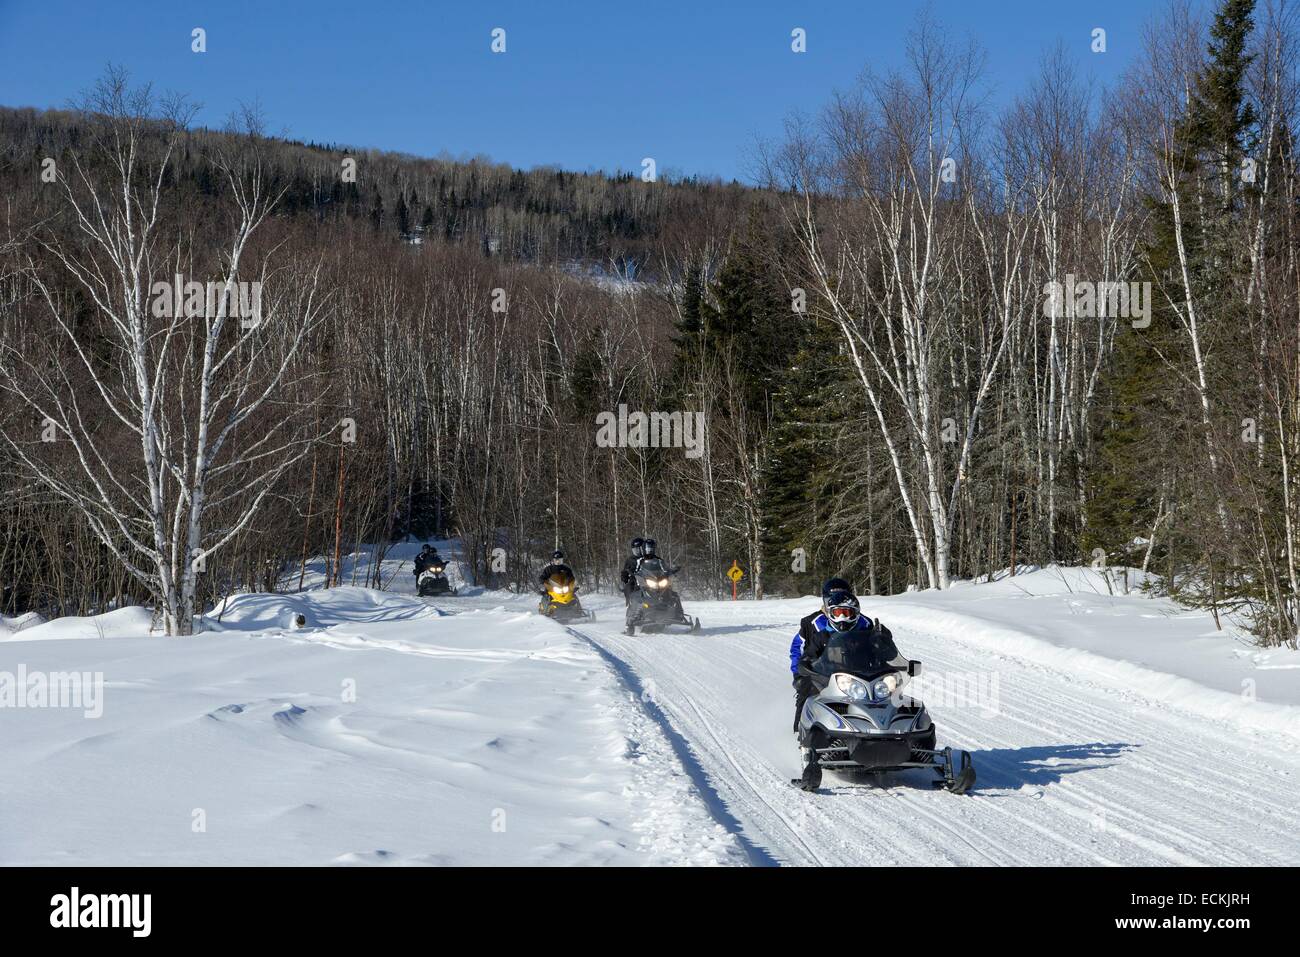 Canada, Quebec province, region of Charlevoix, Baie Saint Paul, column of snowmobiles in single file on a track marked out in the middle of a forest Stock Photo